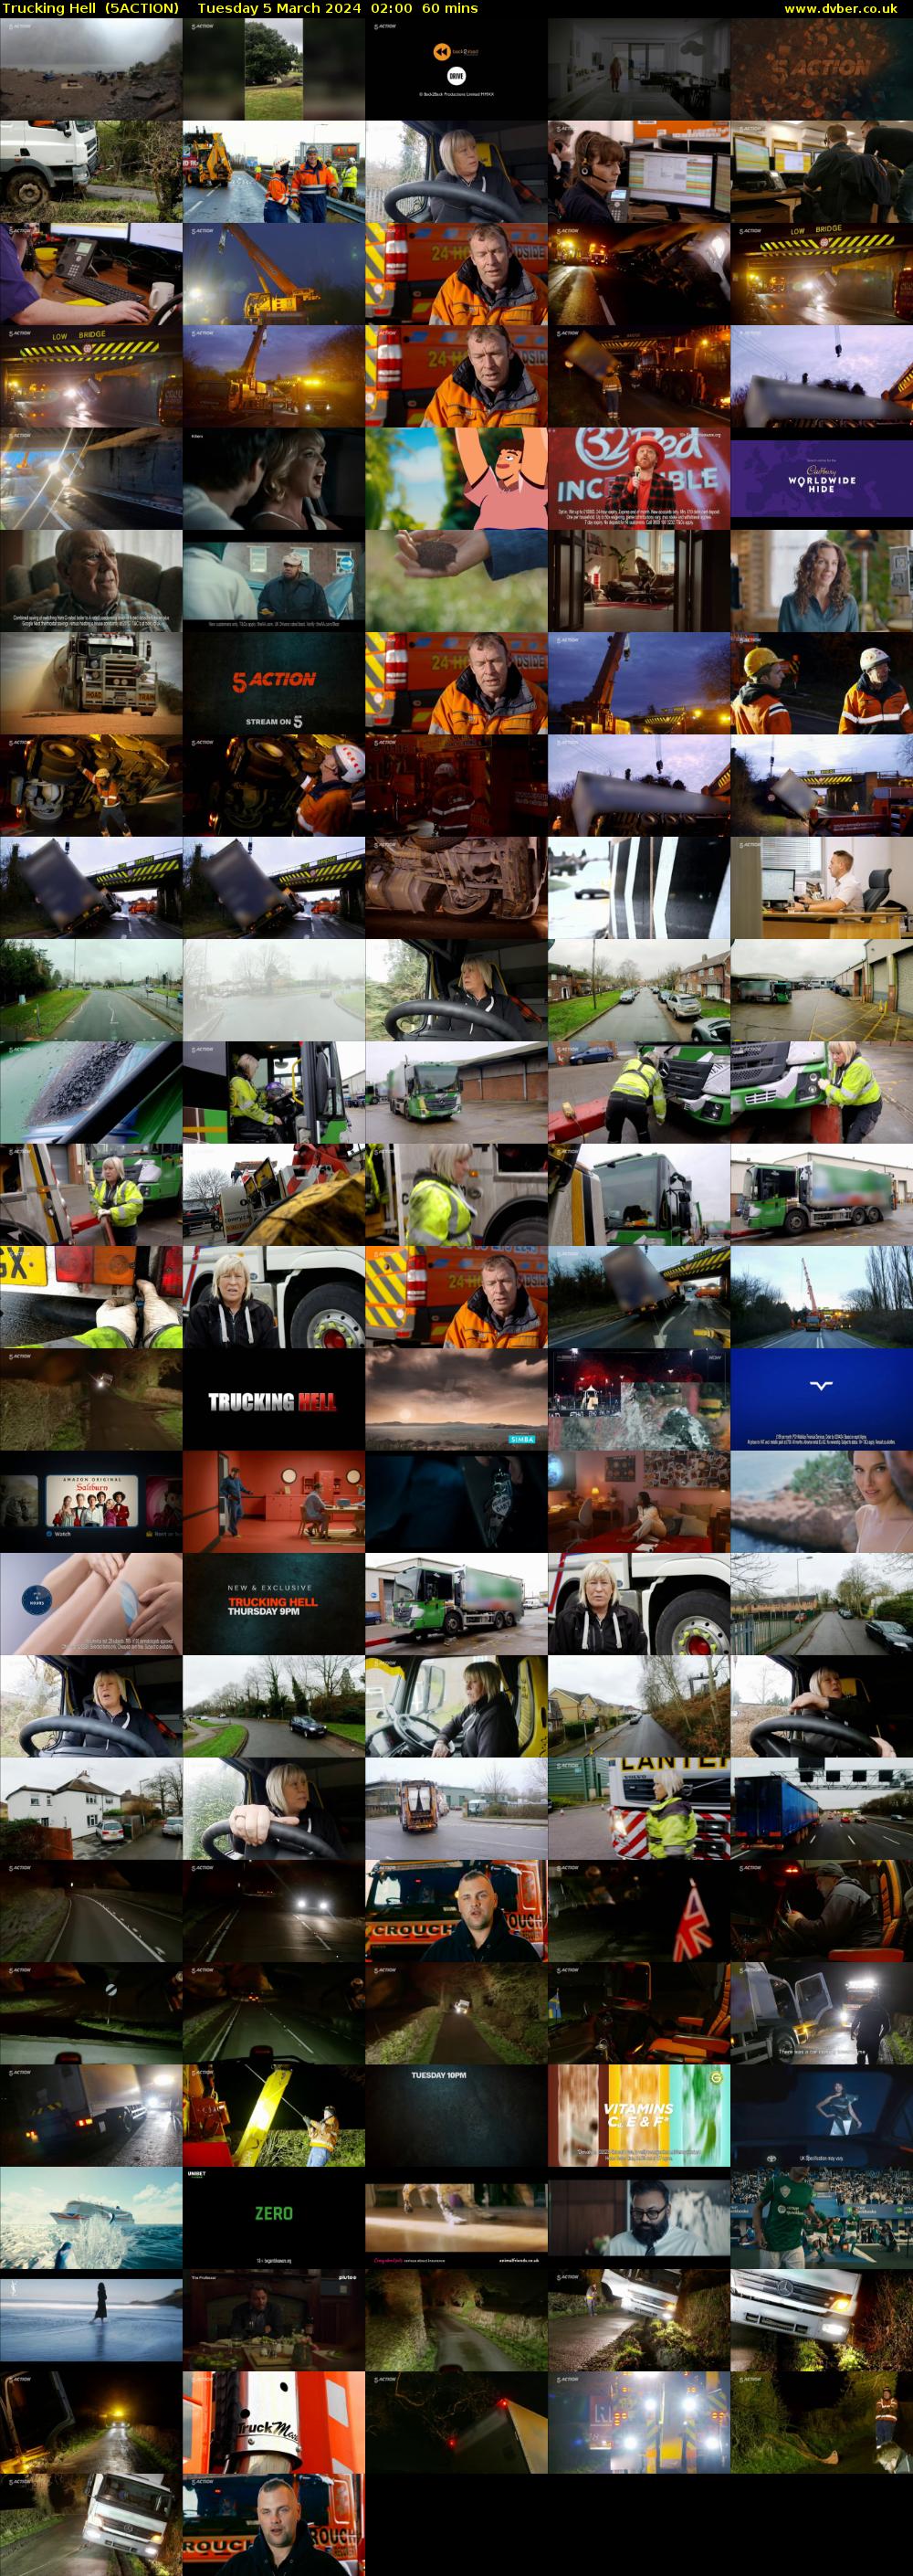 Trucking Hell  (5ACTION) Tuesday 5 March 2024 02:00 - 03:00